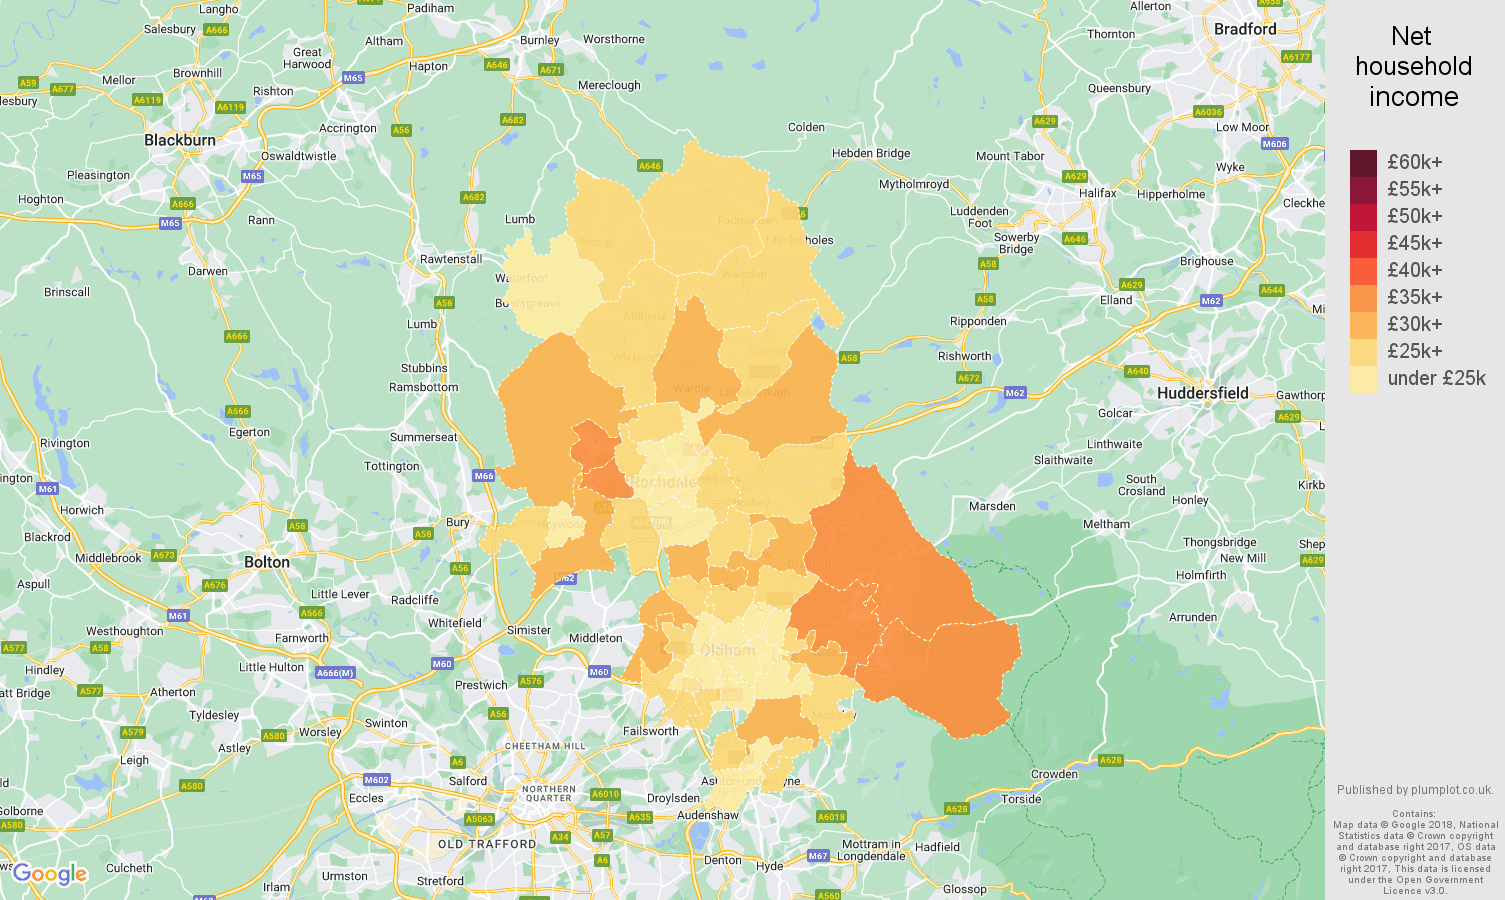 Oldham net household income map